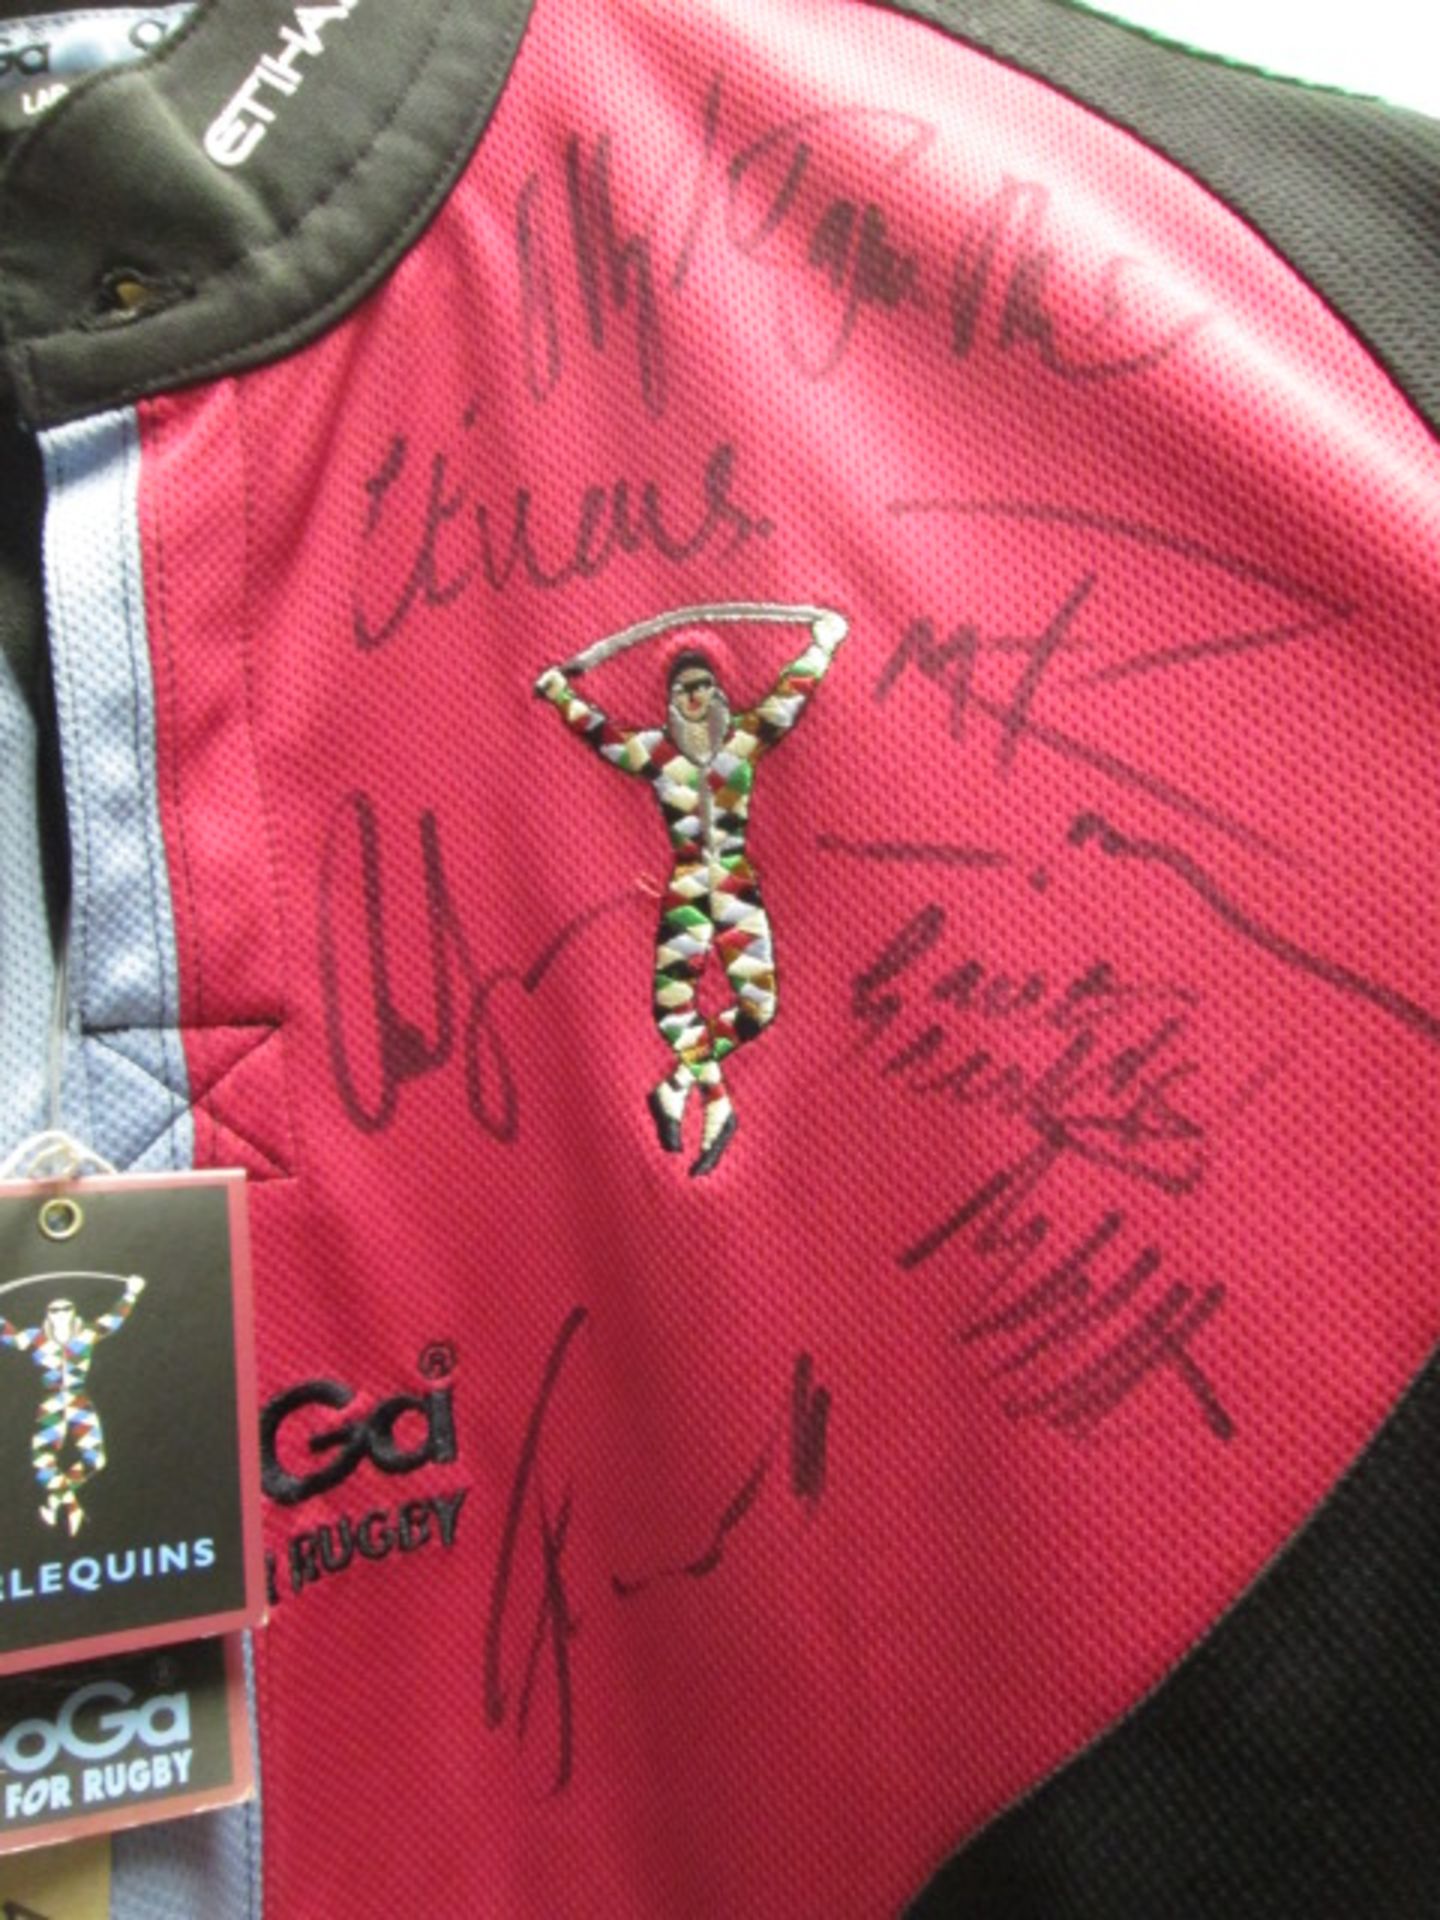 Harlequin's Kooga Rugby Shirt, Signed by the Team. Sponsors Include 'Etihad Airways, eteach.com & - Image 4 of 7